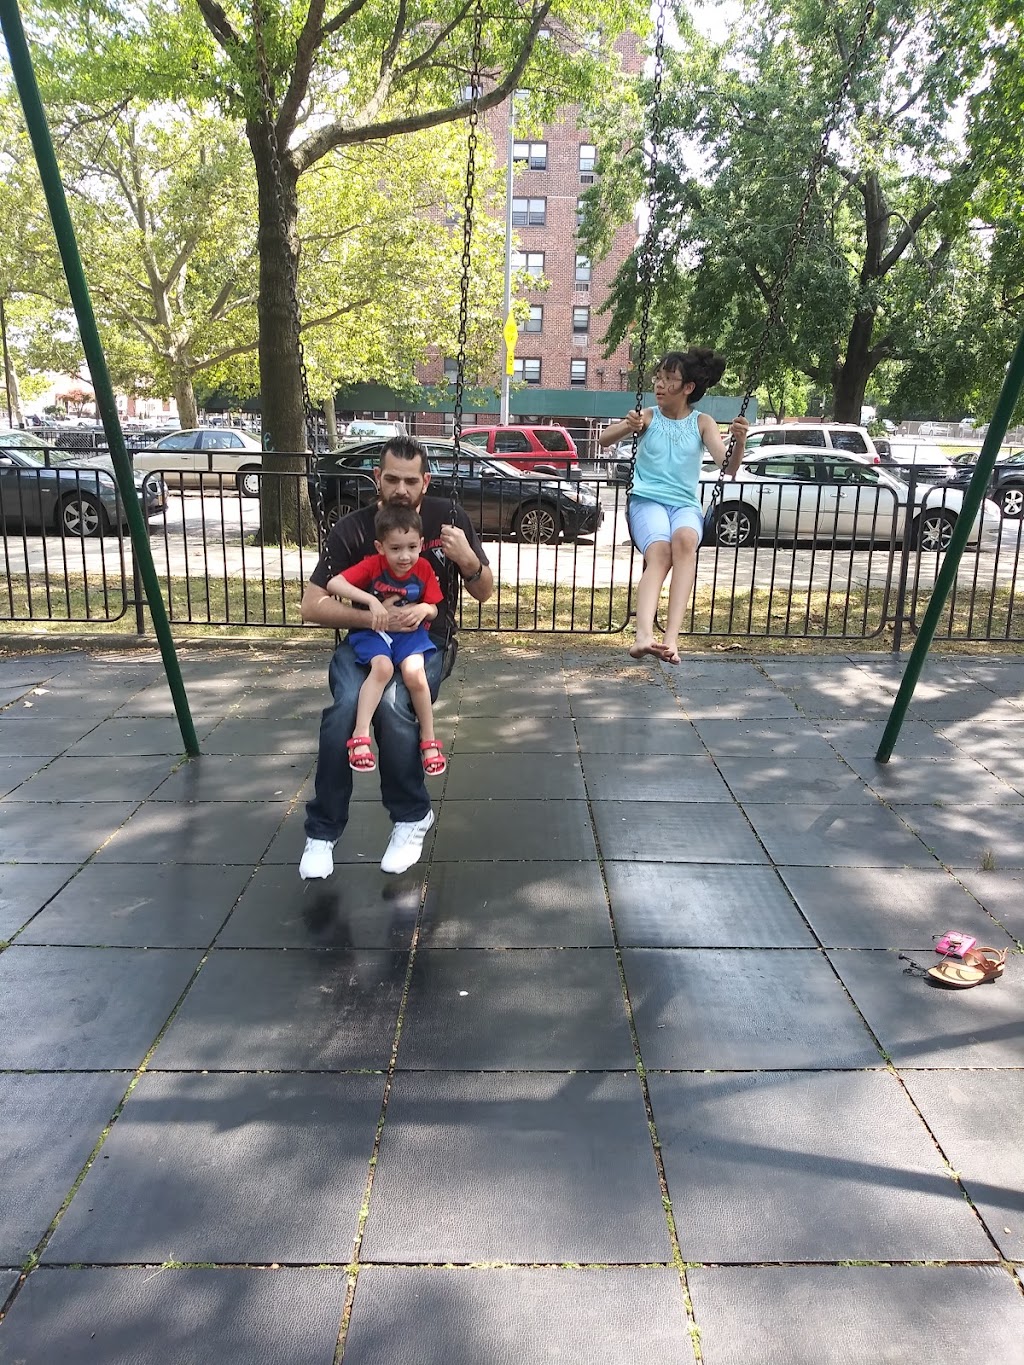 Colucci Playground | Hutchinson River Pkwy. E. bet. Wilkinson Ave. and E. 197 St, Bronx, NY 10461 | Phone: (212) 639-9675